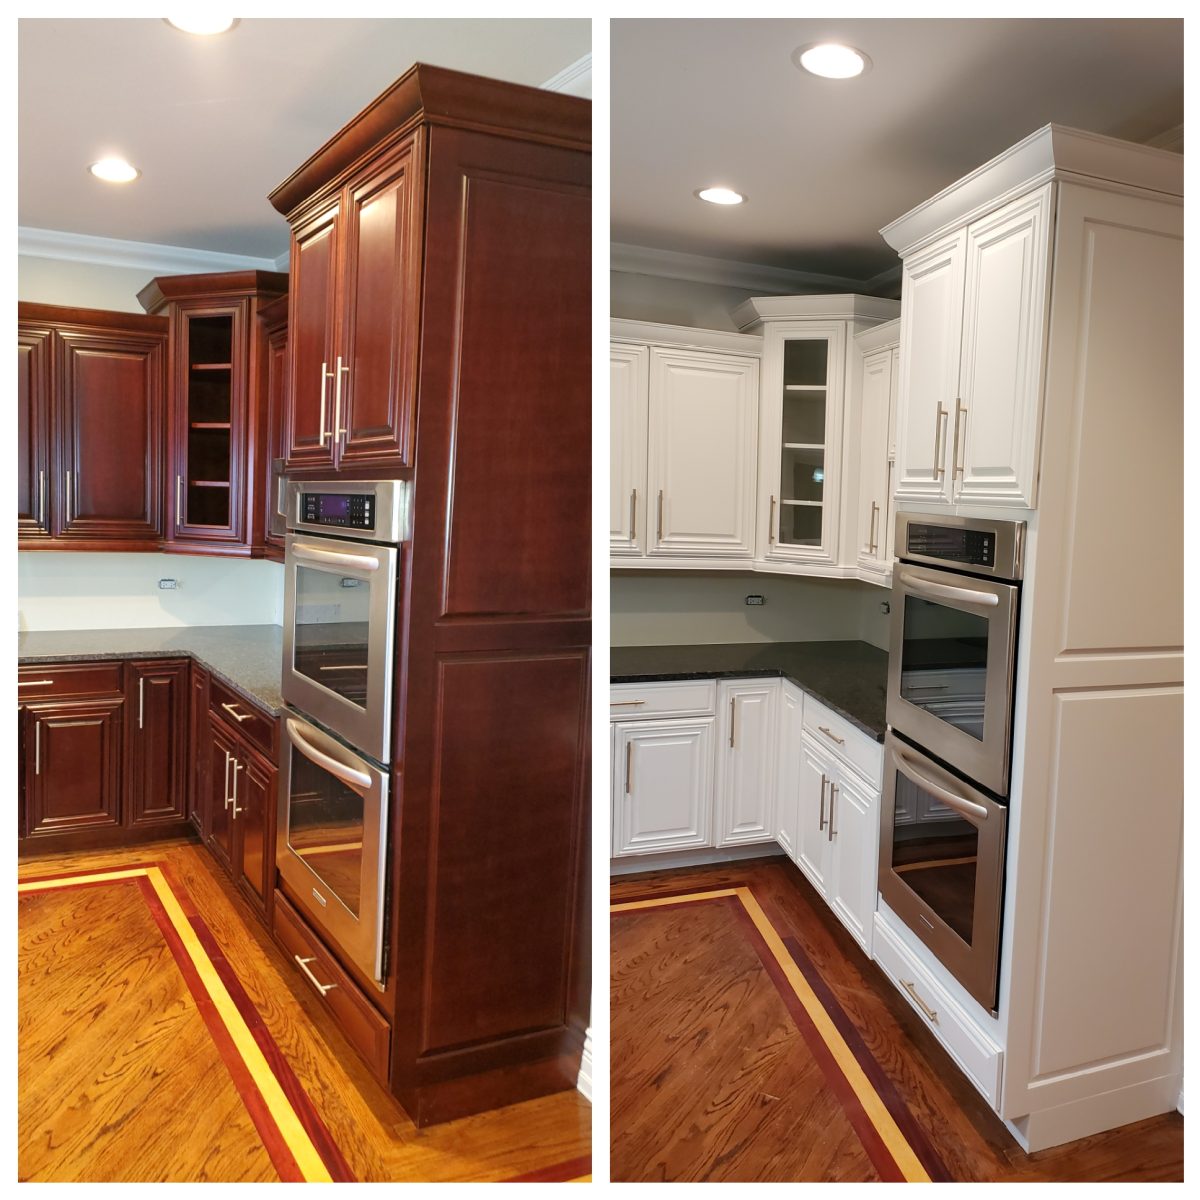 Tips For Painting Cherry Cabinets White, Cherry Wood And White Kitchen Cabinets